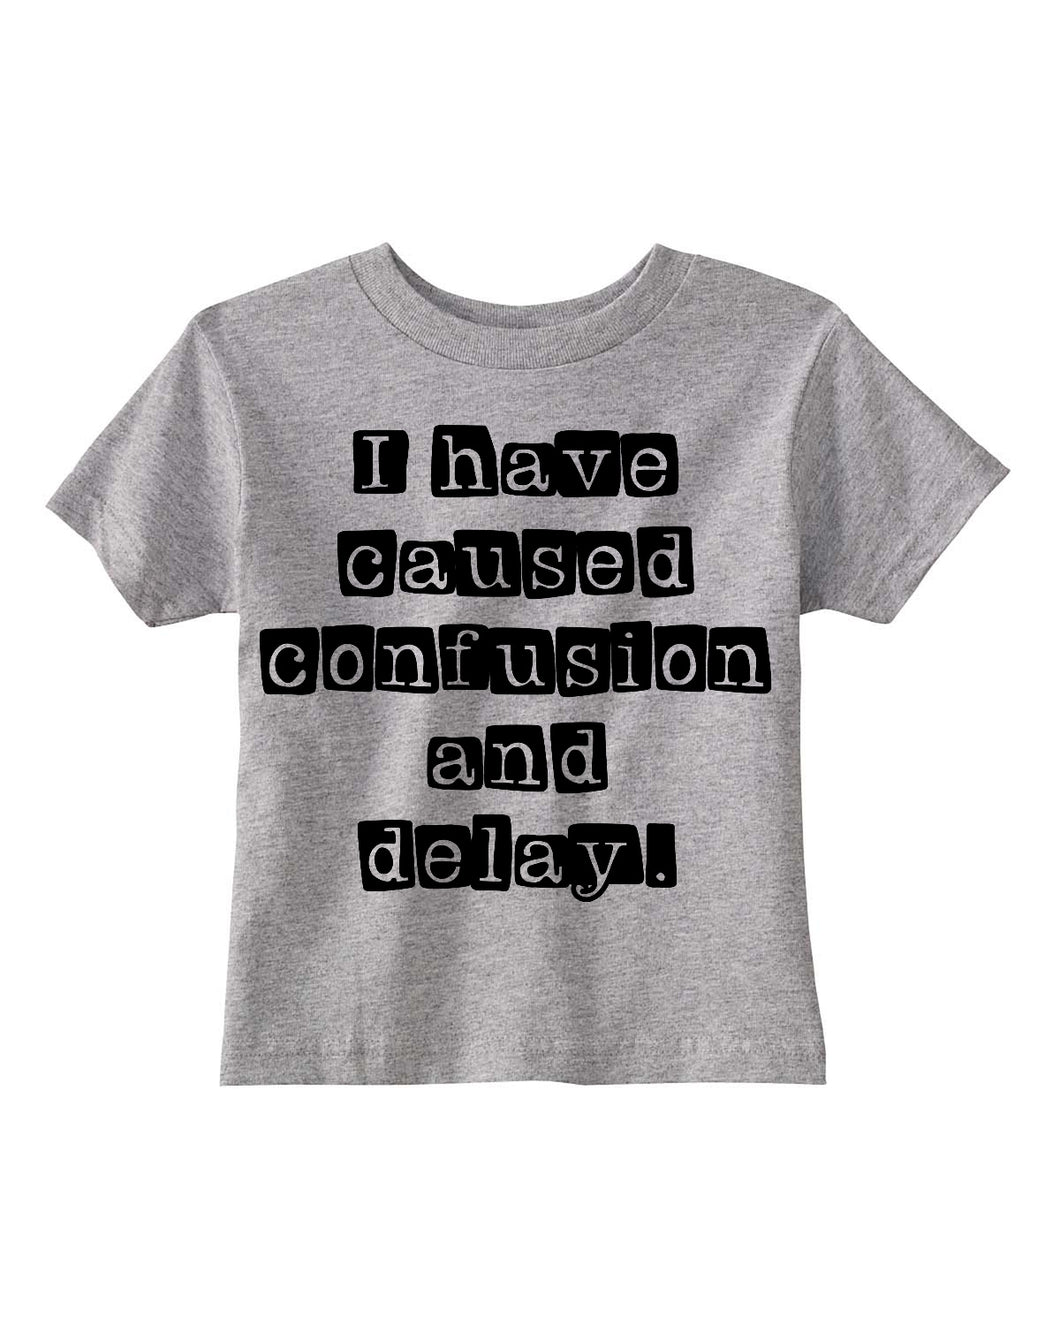 I Have Caused Confusion and Delay Kids Tee- Discontinued